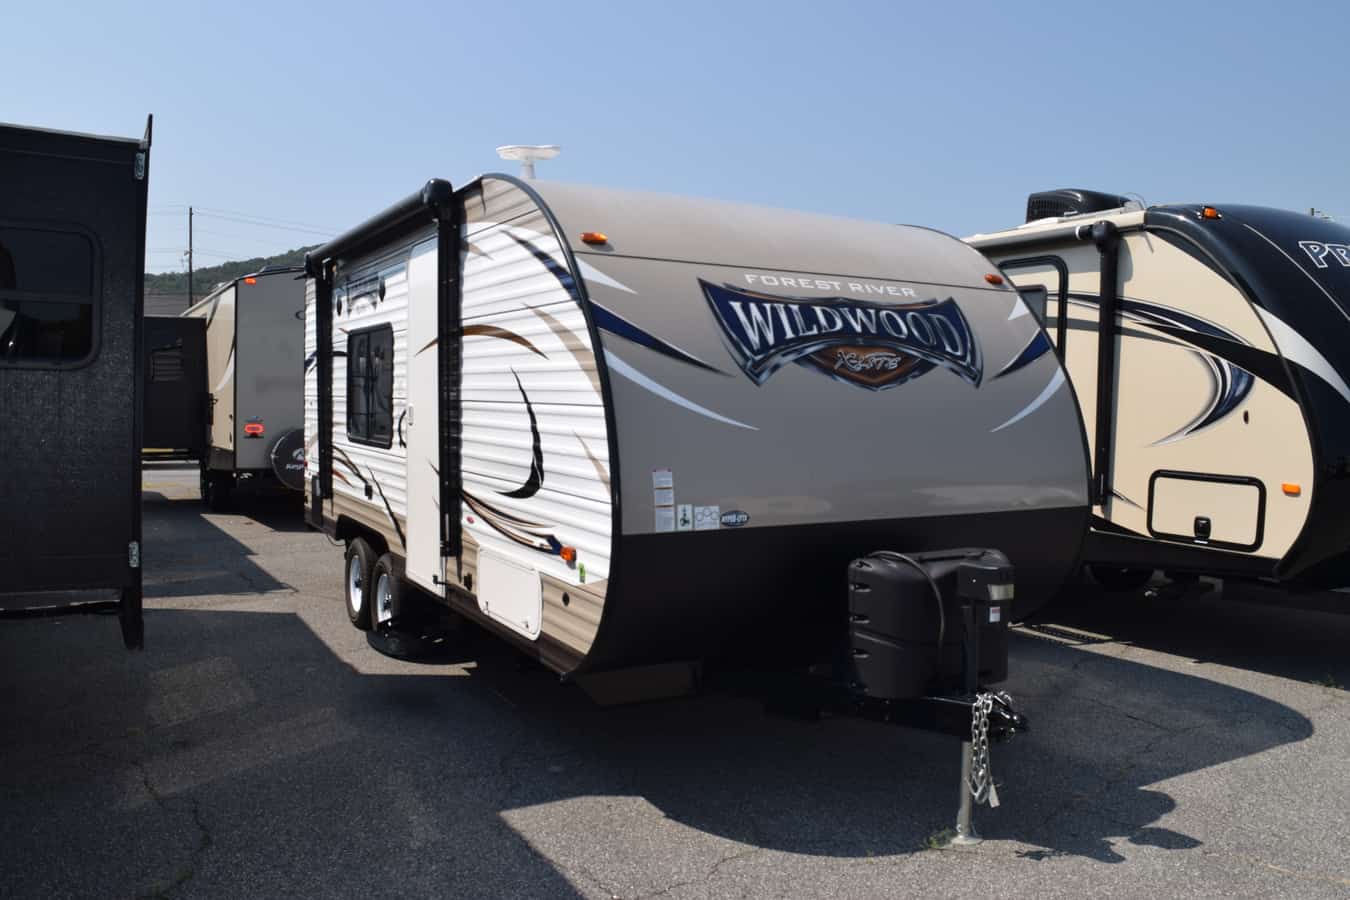 USED 2018 Forest River WILDWOOD 171RBXL